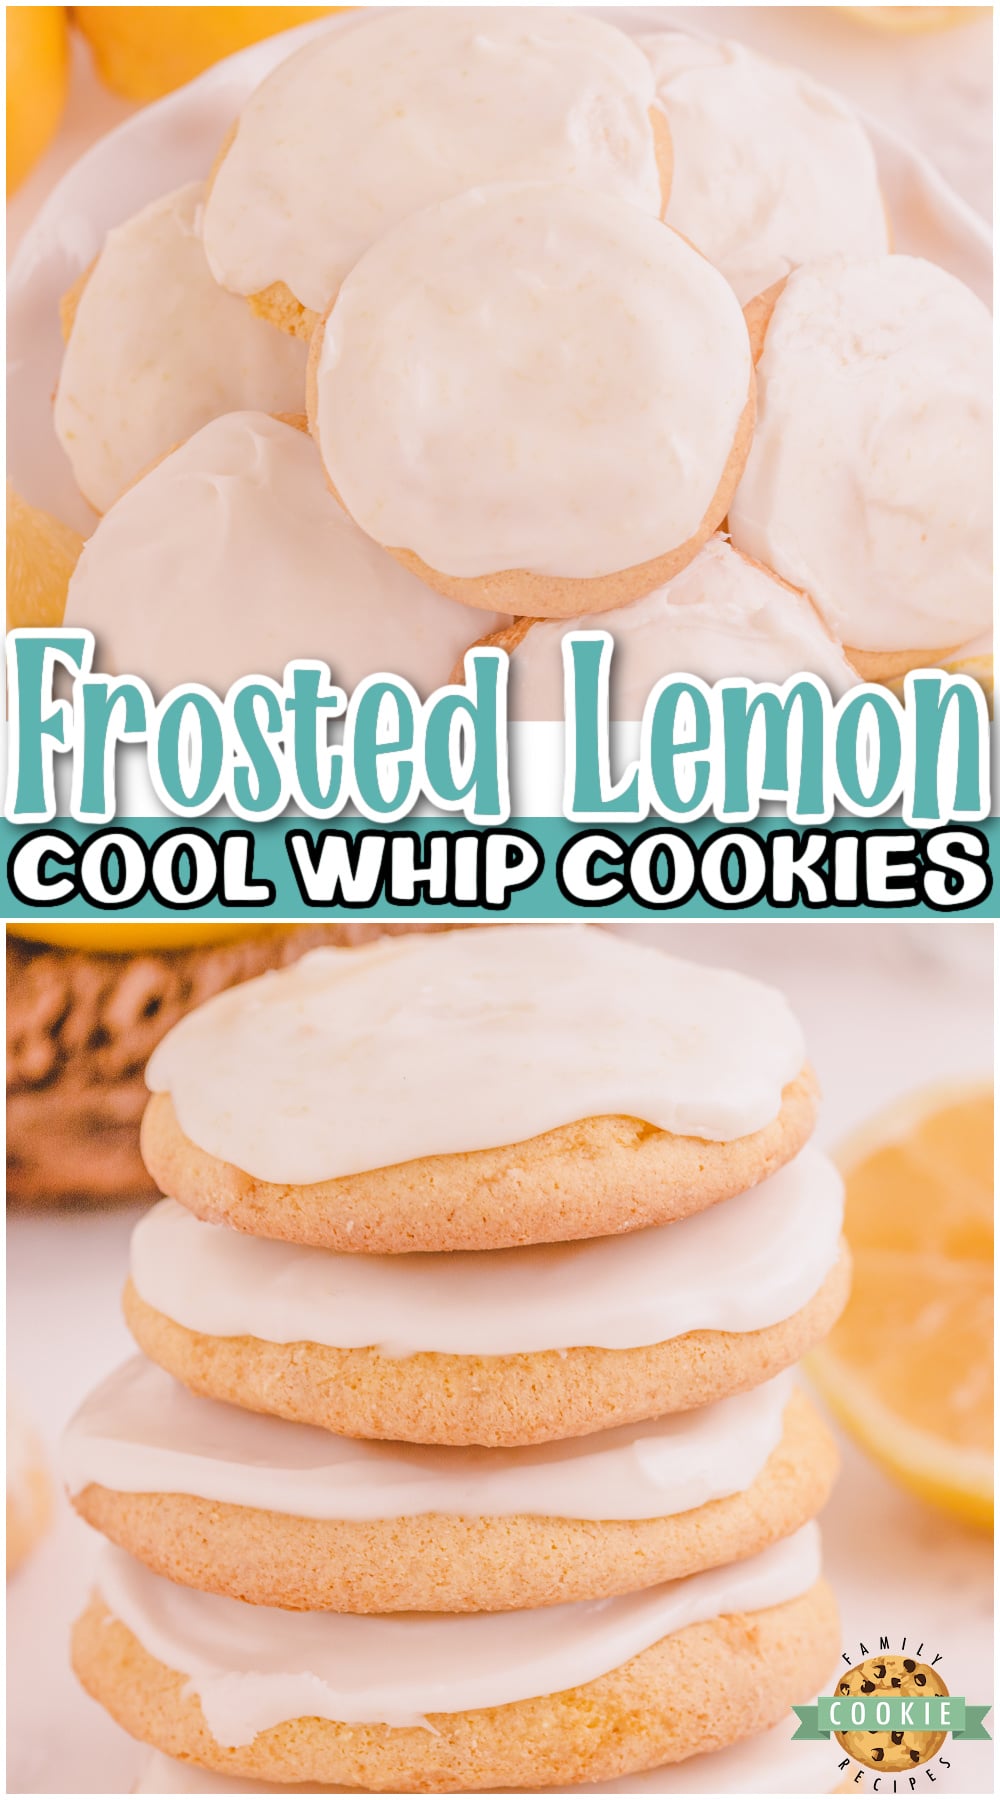 Lemon Cake Mix Cool Whip Cookies are a fun & tasty 3 ingredient soft lemony cookie recipe that everyone loves! Cake mix, Cool Whip and an egg combine for a super simple lemon cookie that tastes delicious.  via @buttergirls